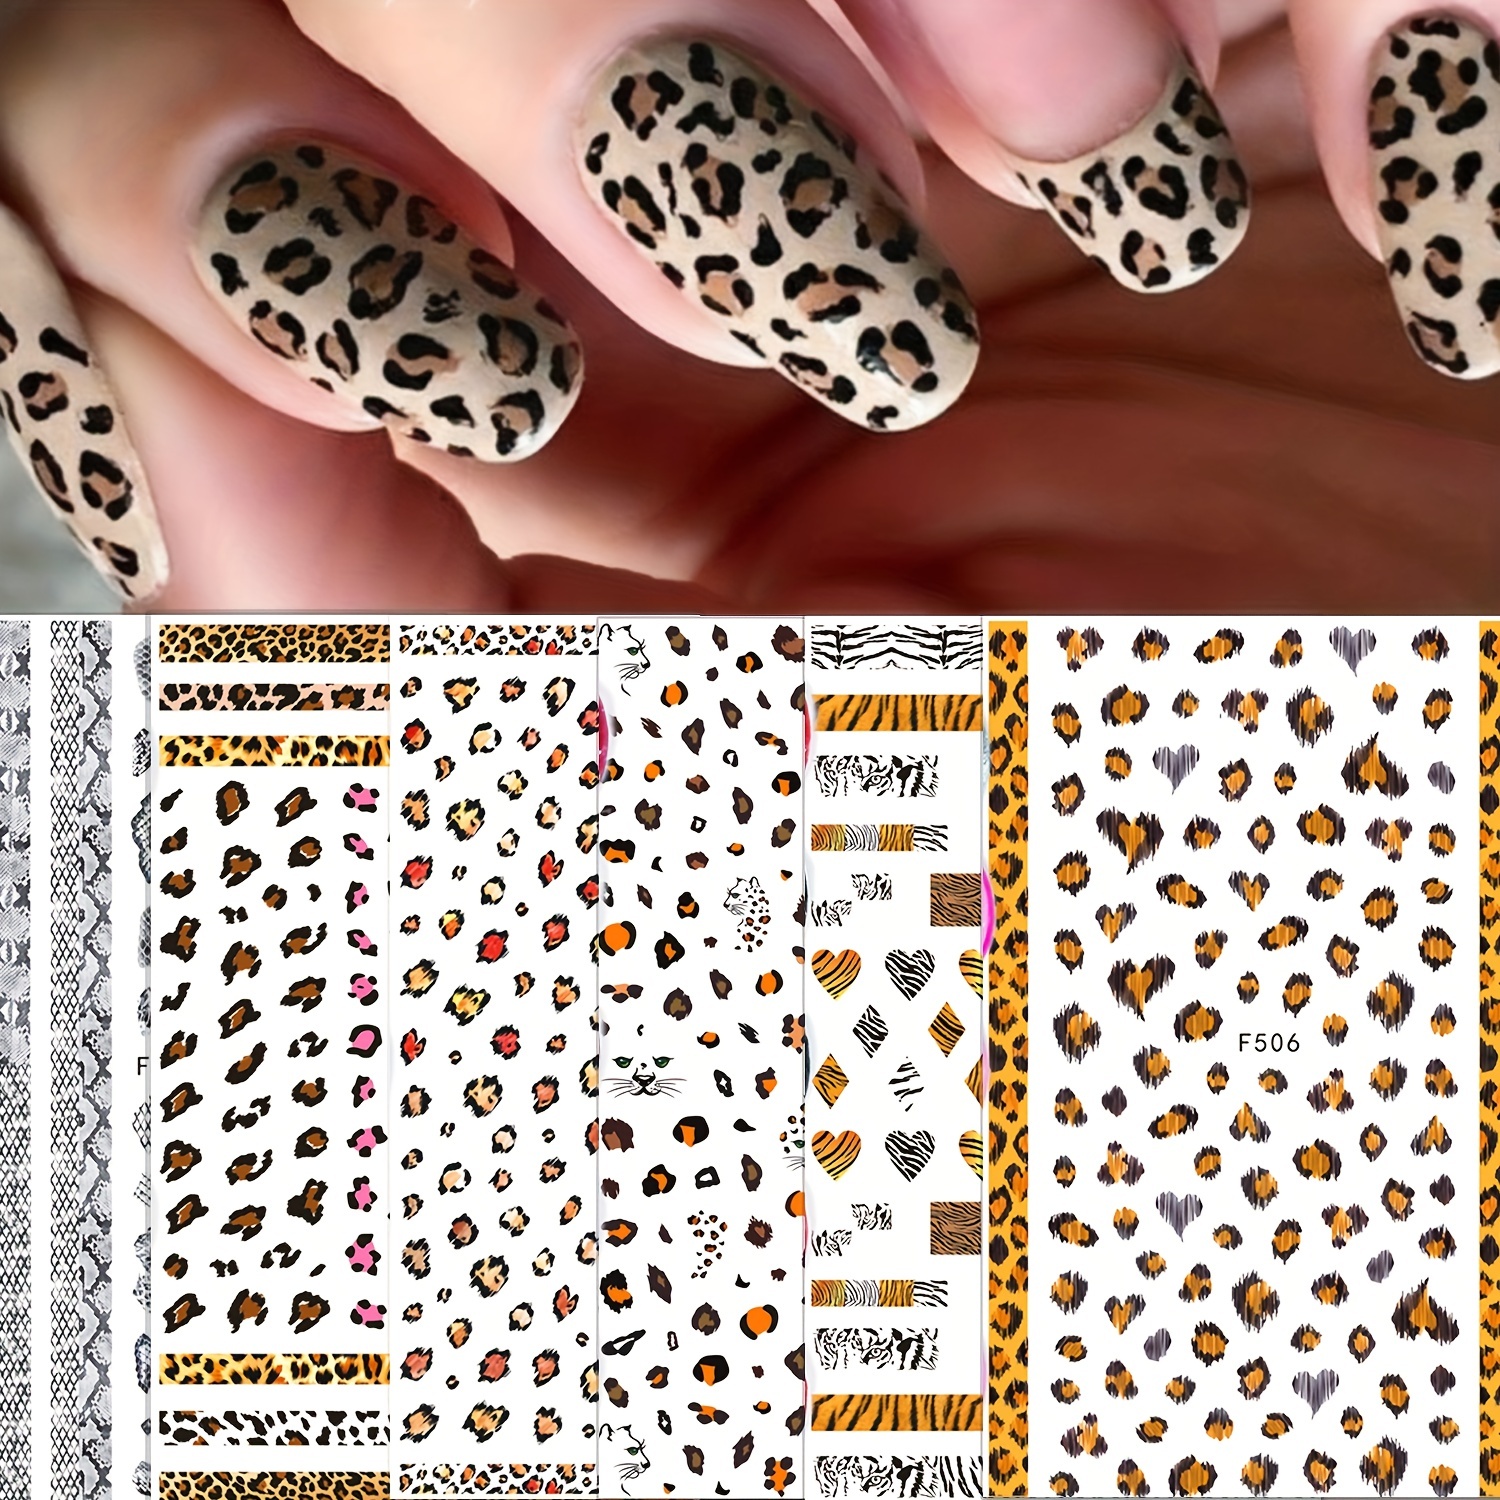 Cute Leopard Nail Stickers Self Adhesive Decoration Decals Tips Manicure  Tiger Nail Art Decals Leopard Print Stickers For Girls From Kareem123,  $1.03 | DHgate.Com